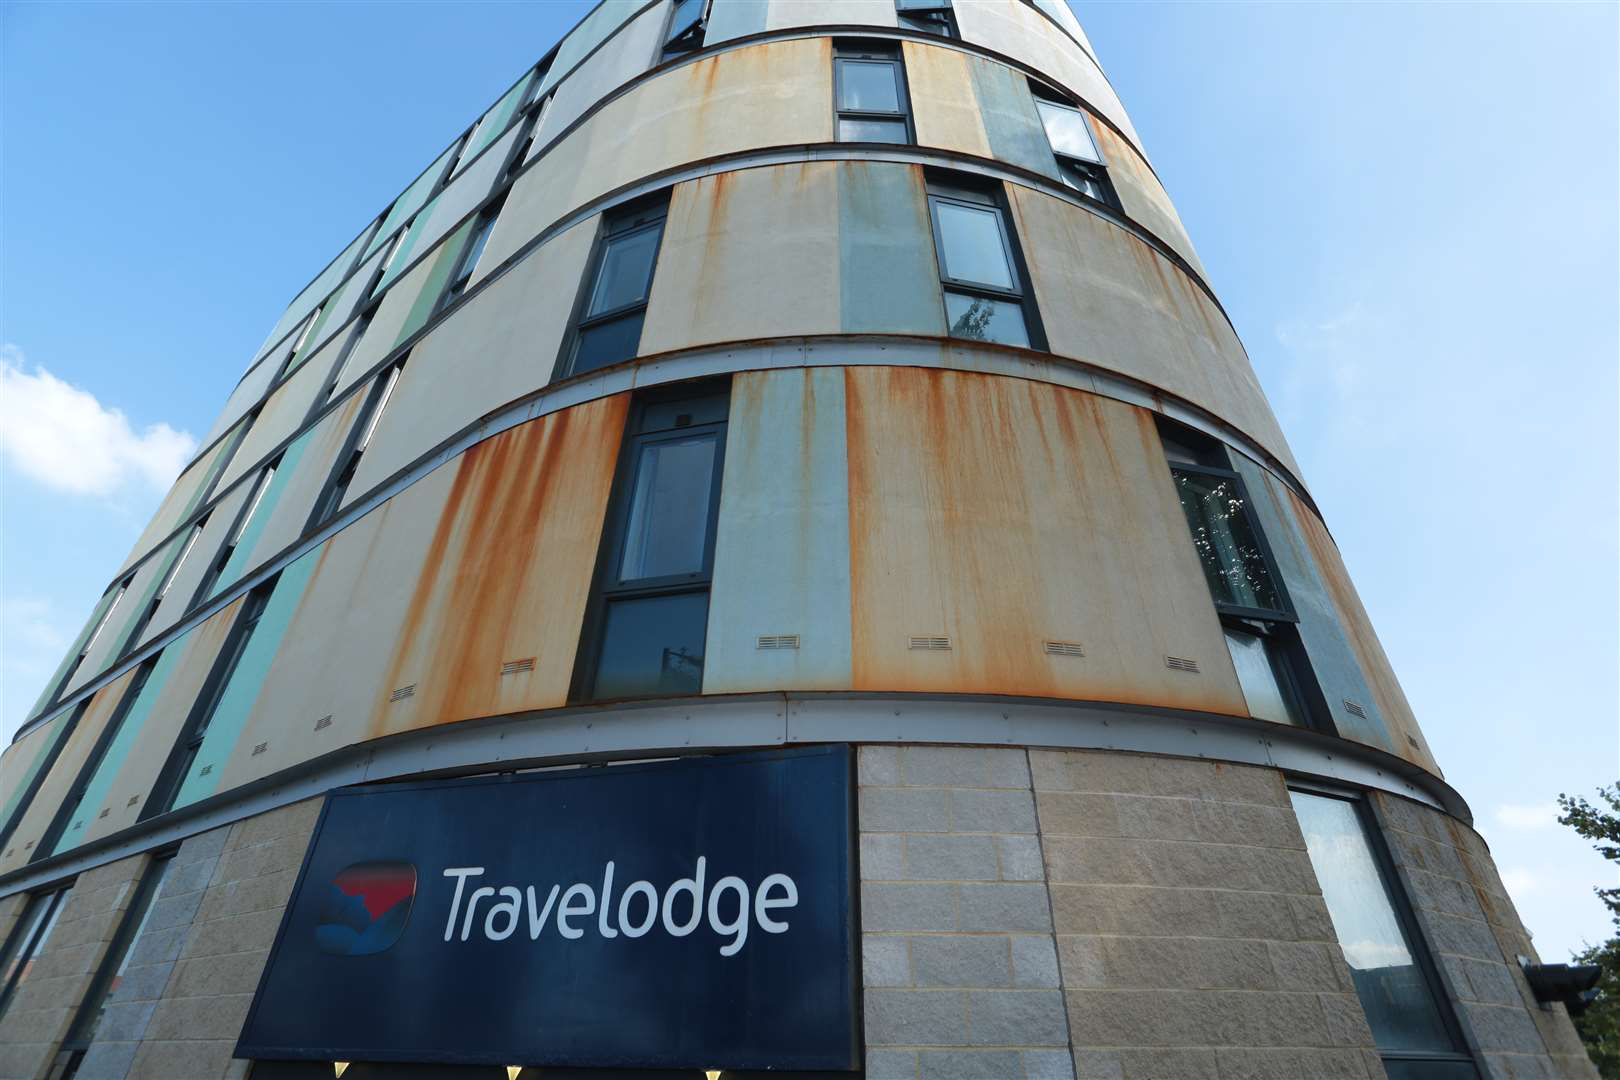 The Travelodge in Maidstone and its offending rust stains